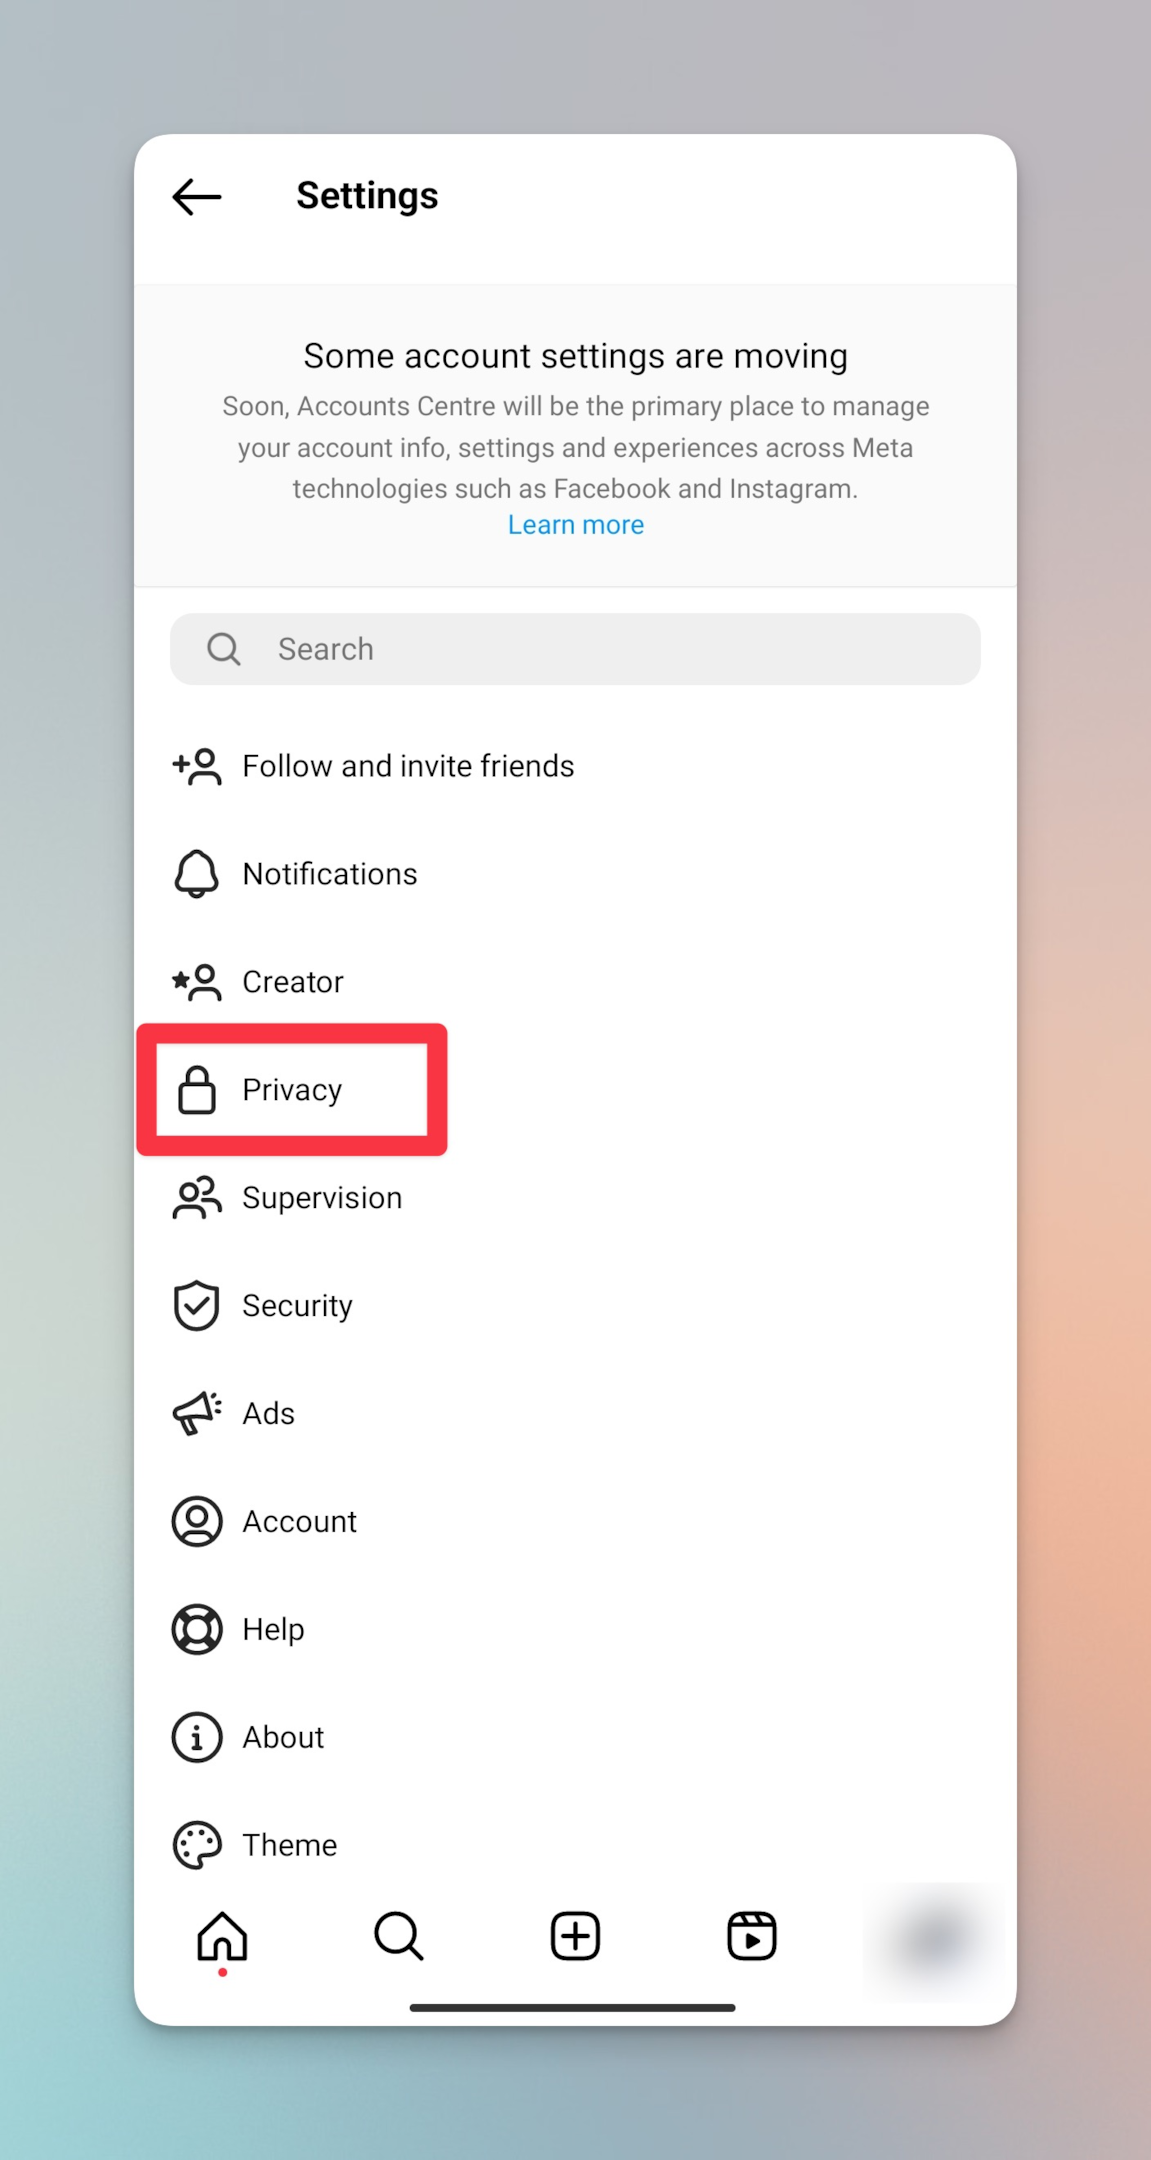 Remote.tools is highlighting Privacy option under Instagram settings to hide the activity status